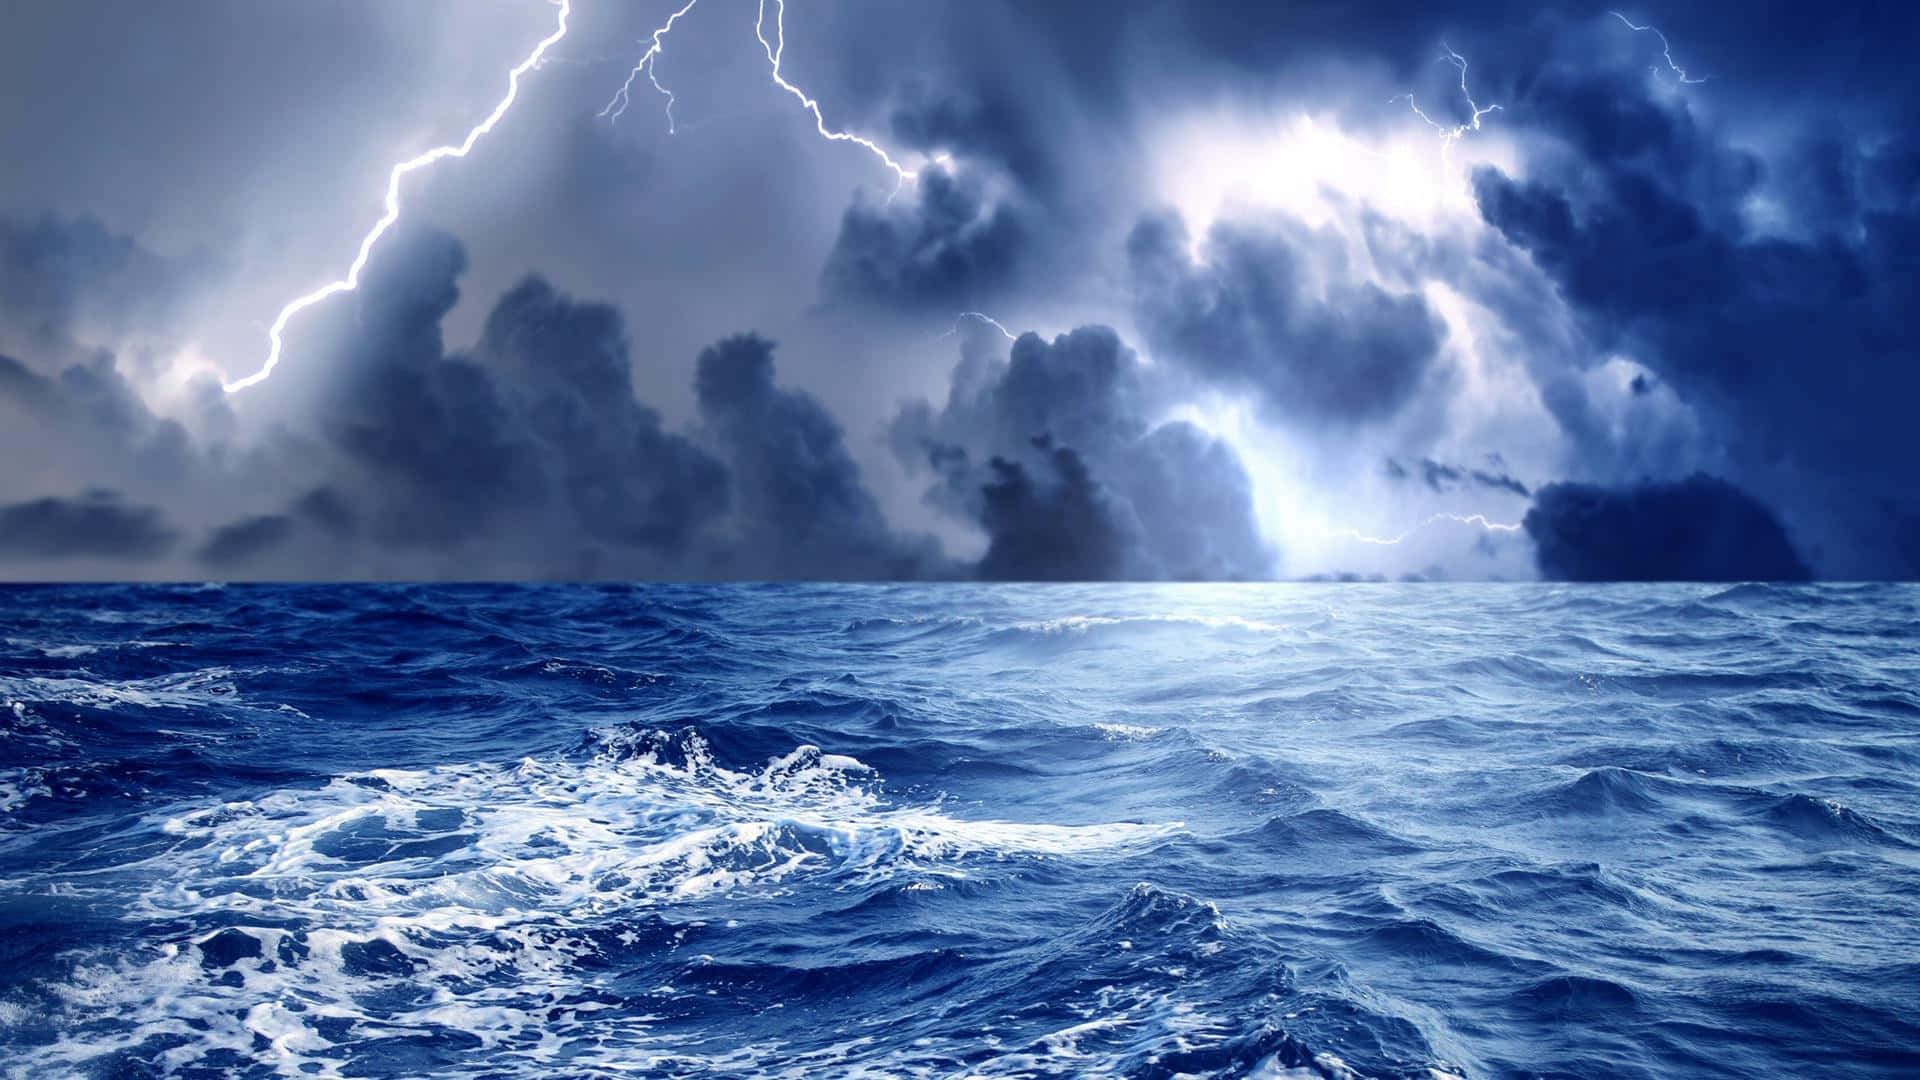 A deadly storm crashing against the ocean waves Wallpaper